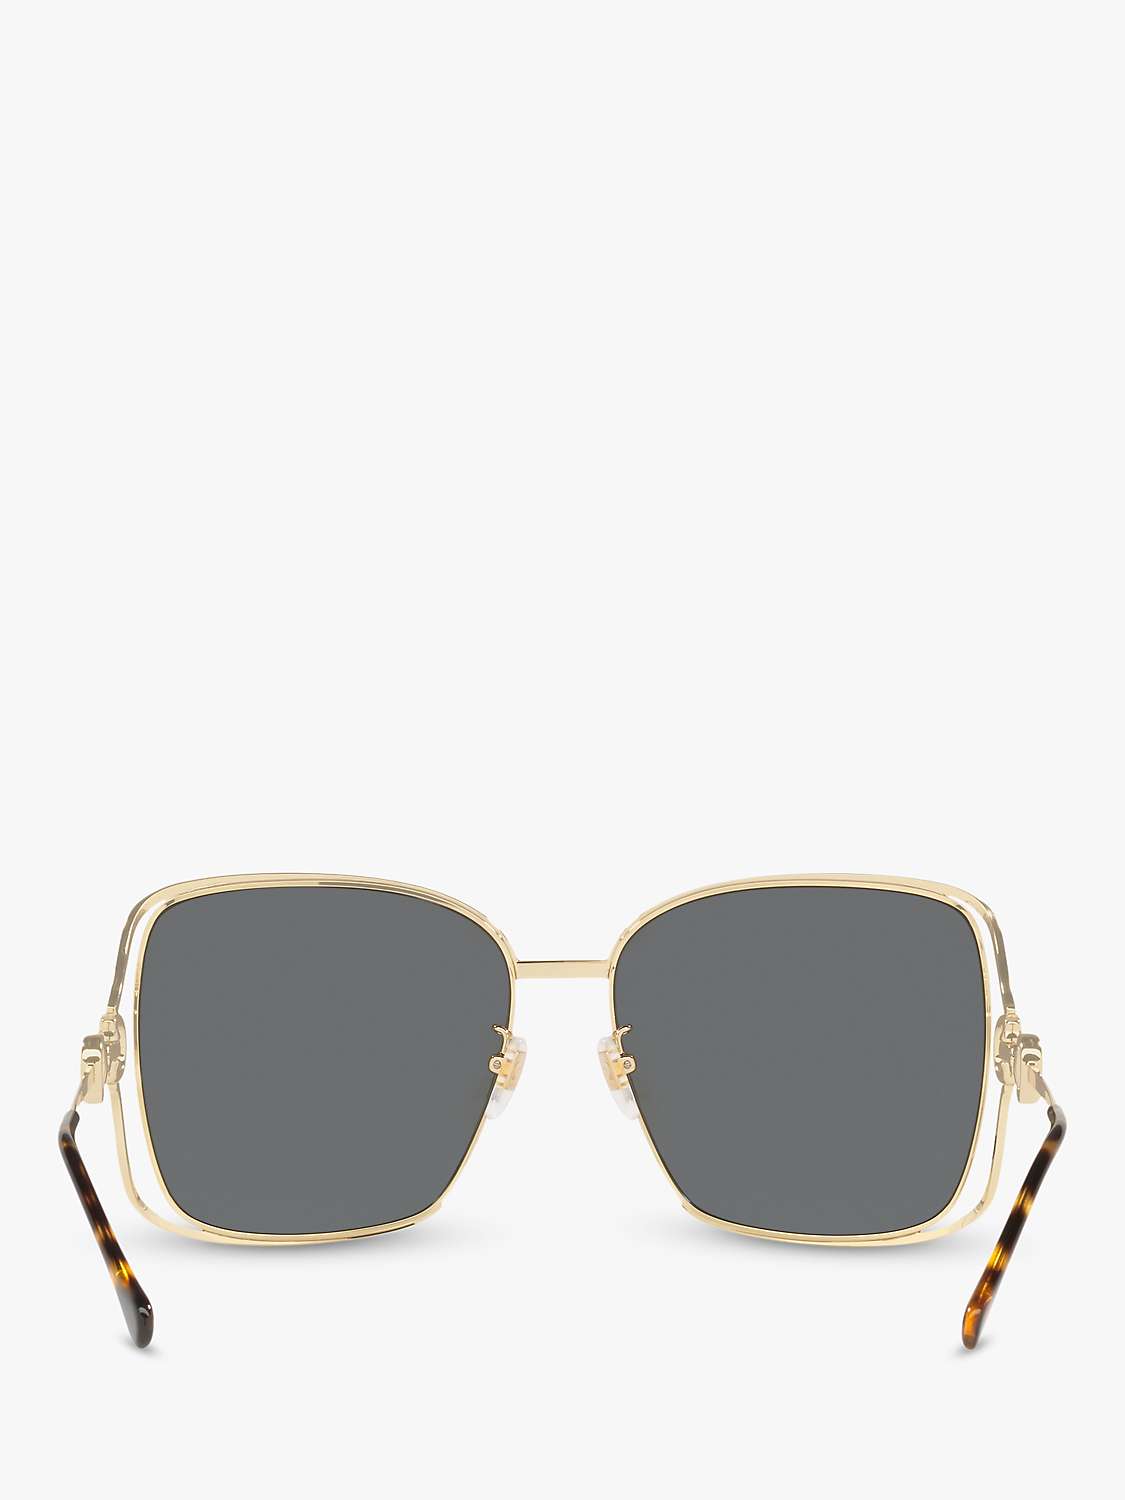 Buy Gucci GG1020S Women's Square Sunglasses, Gold/Grey Online at johnlewis.com